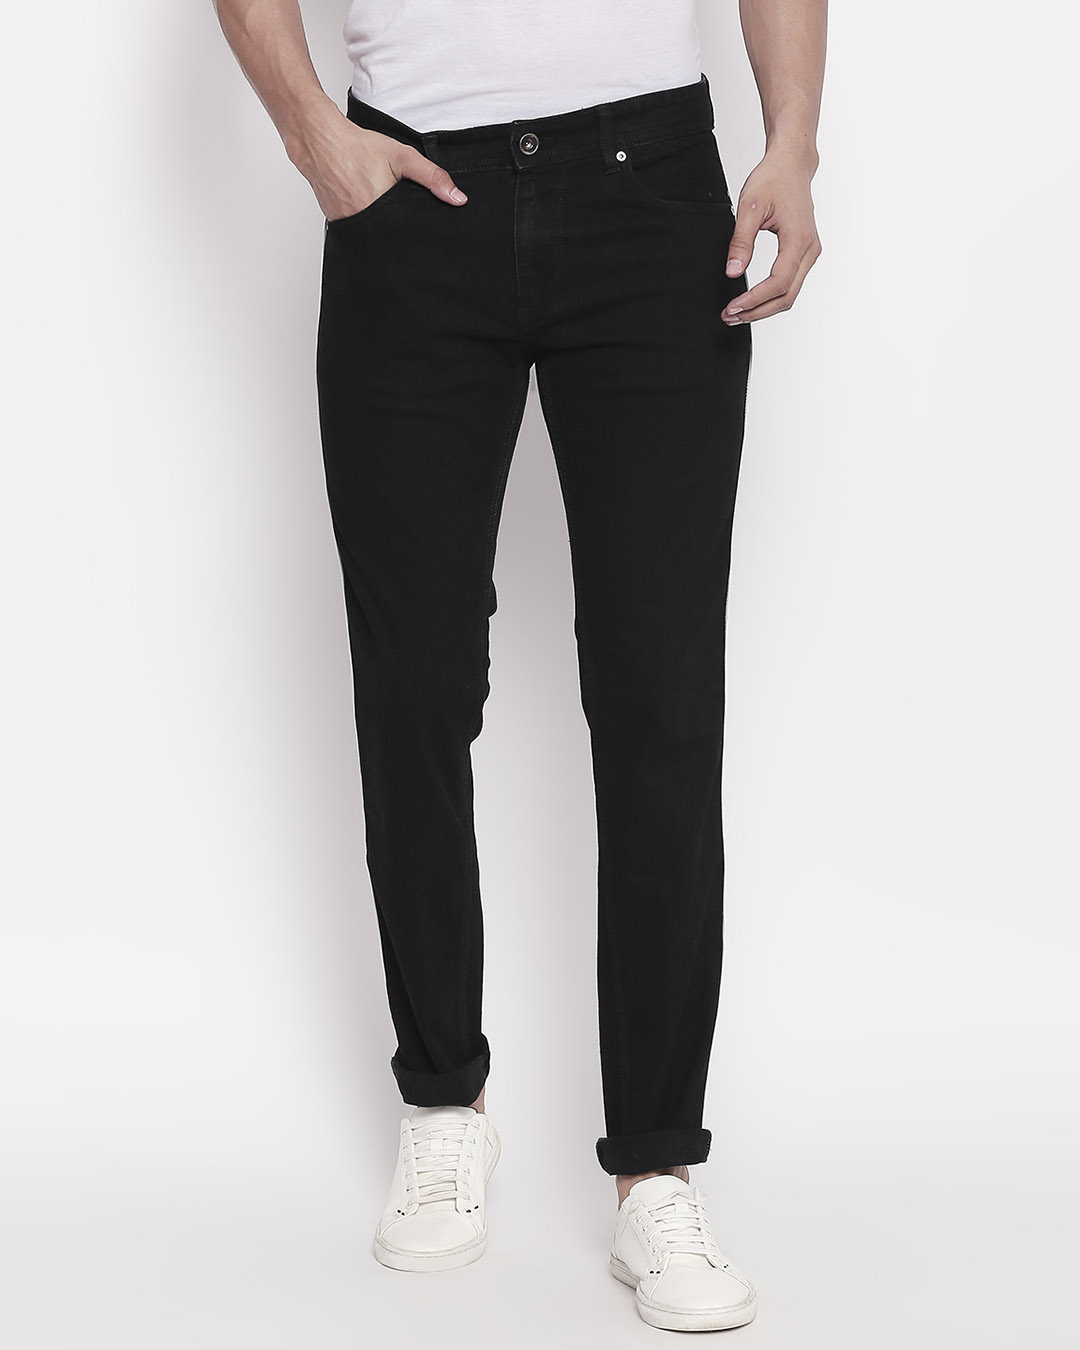 Buy Men's Black Washed With Side Twill Tape Slim Fit Mid Rise Jeans ...